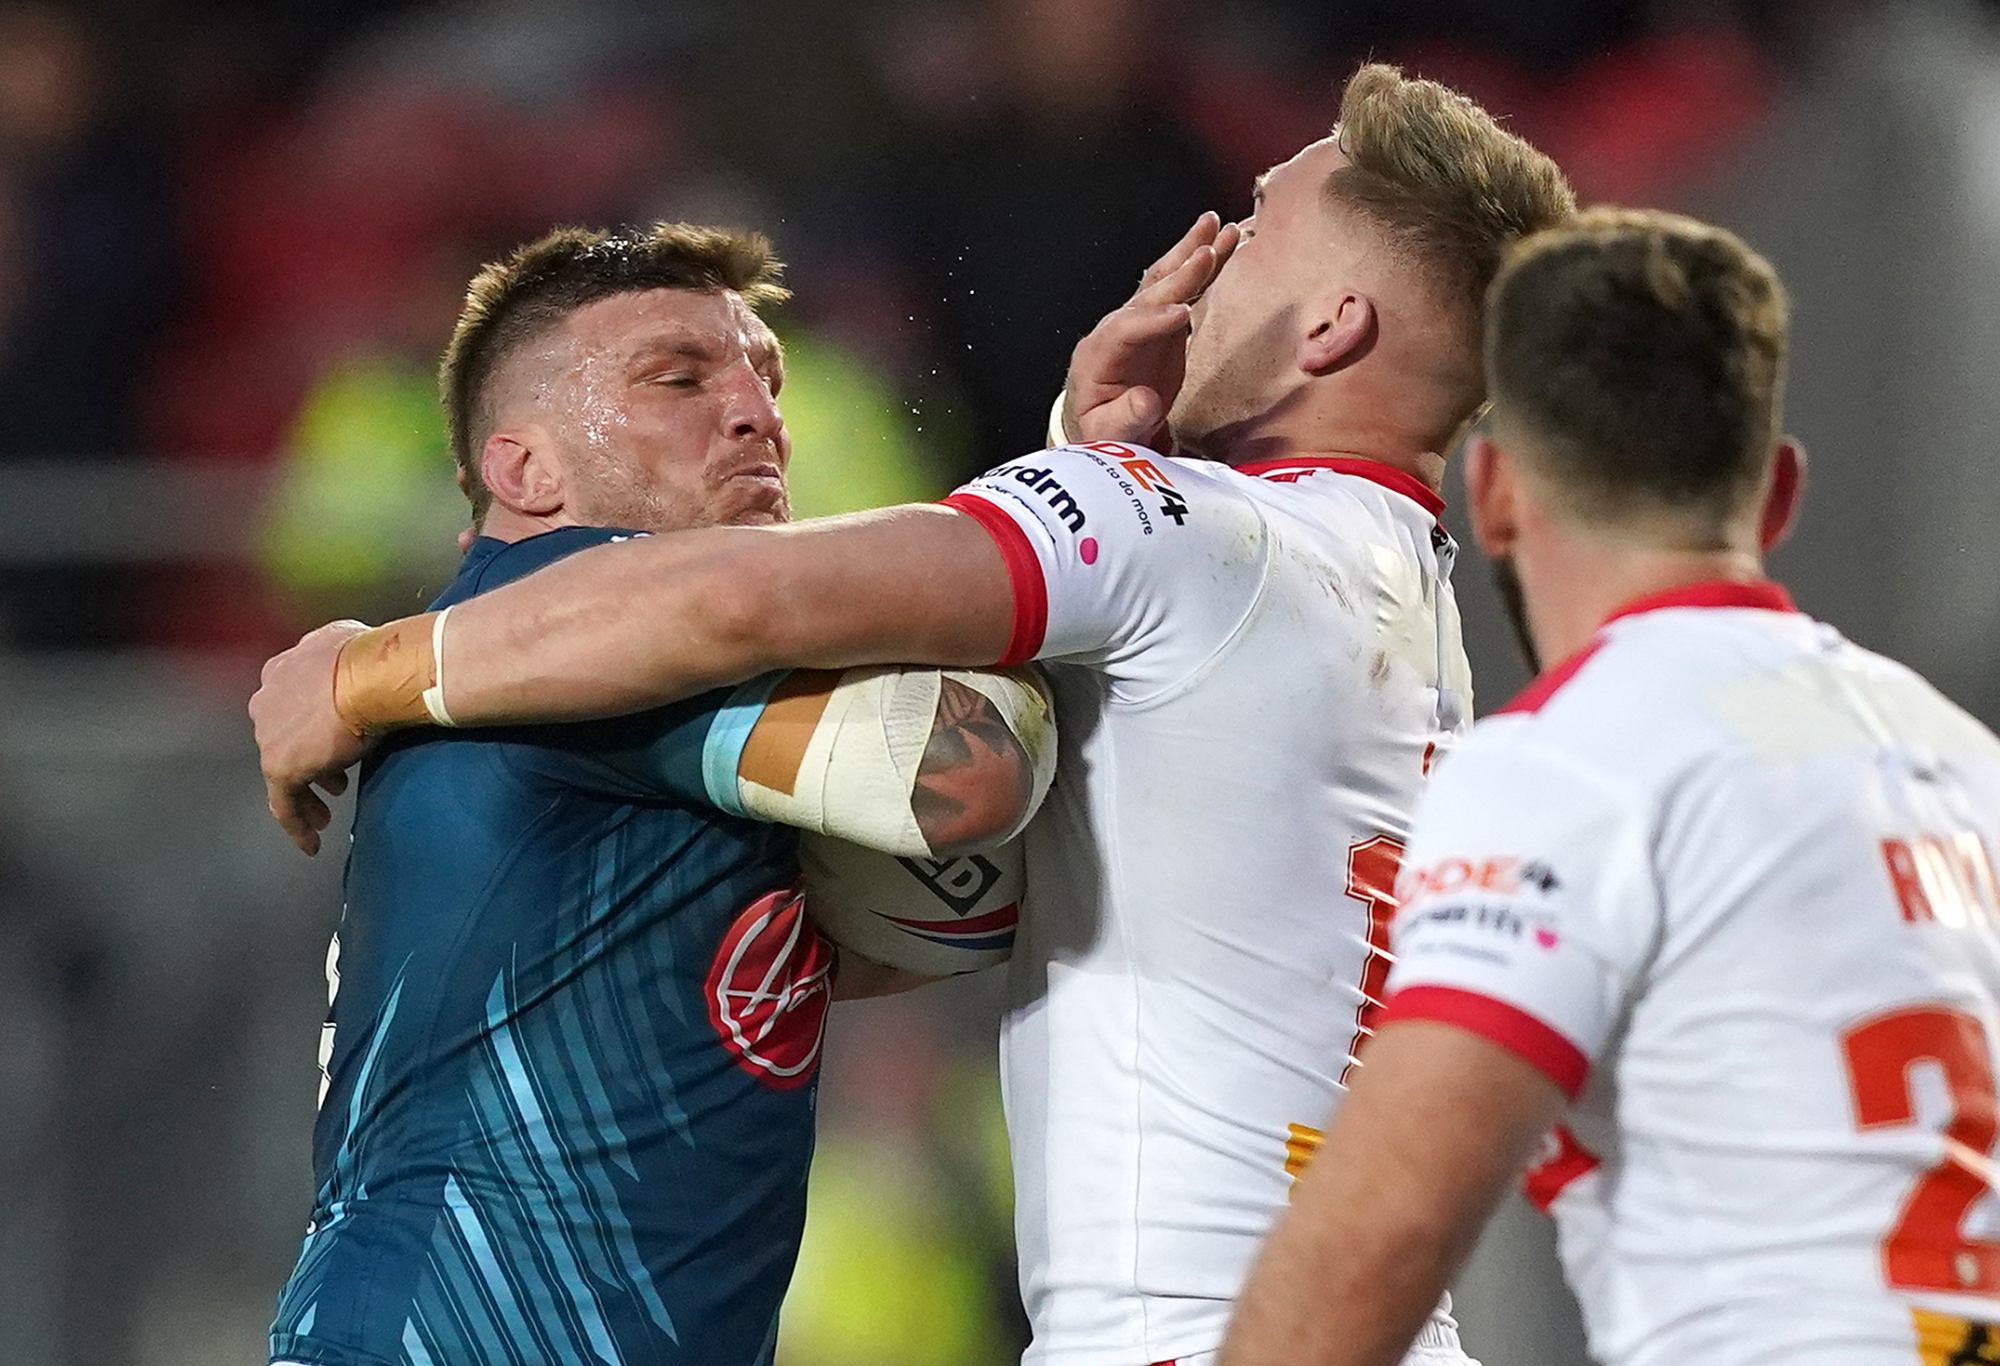 Warrington Wolves' Josh McGuire is tackled by St Helens Saints' Matty Lees, during the Betfred Super League match at the Totally Wicked Stadium, St Helens. Picture date: Thursday April 20, 2023. (Photo by Martin Rickett/PA Images via Getty Images)